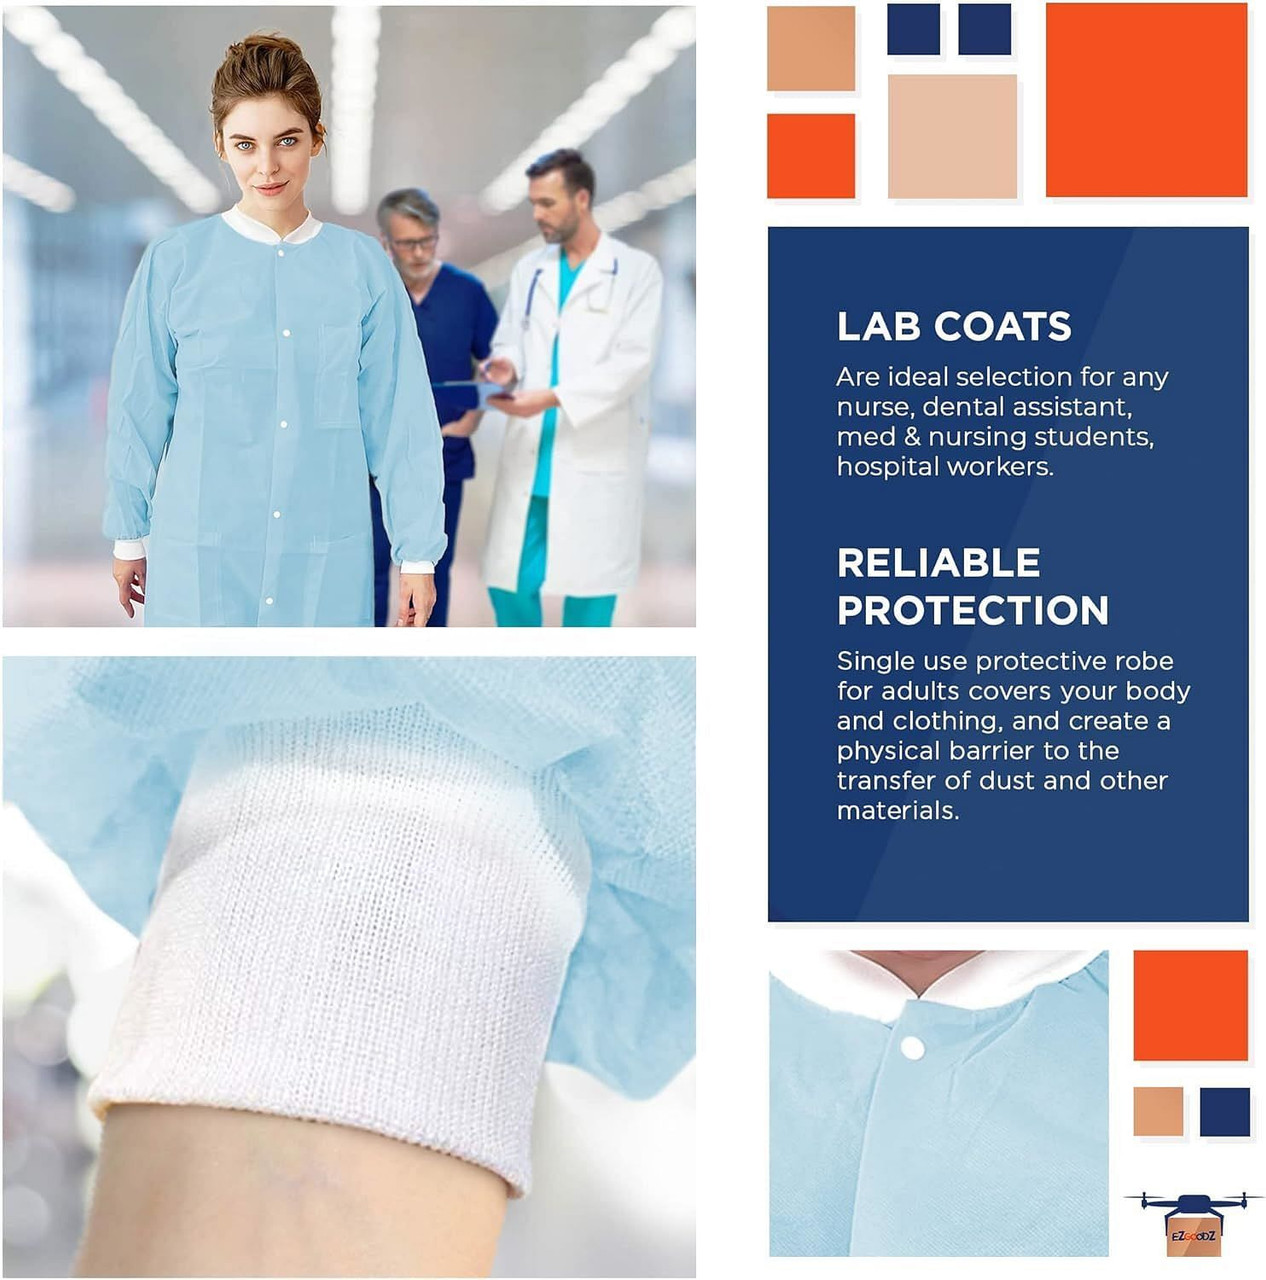 Disposable Lab Coats. Pack of 10 Sky Blue SPP 45 gsm Work Gowns Medium. Protective Clothing with Sn